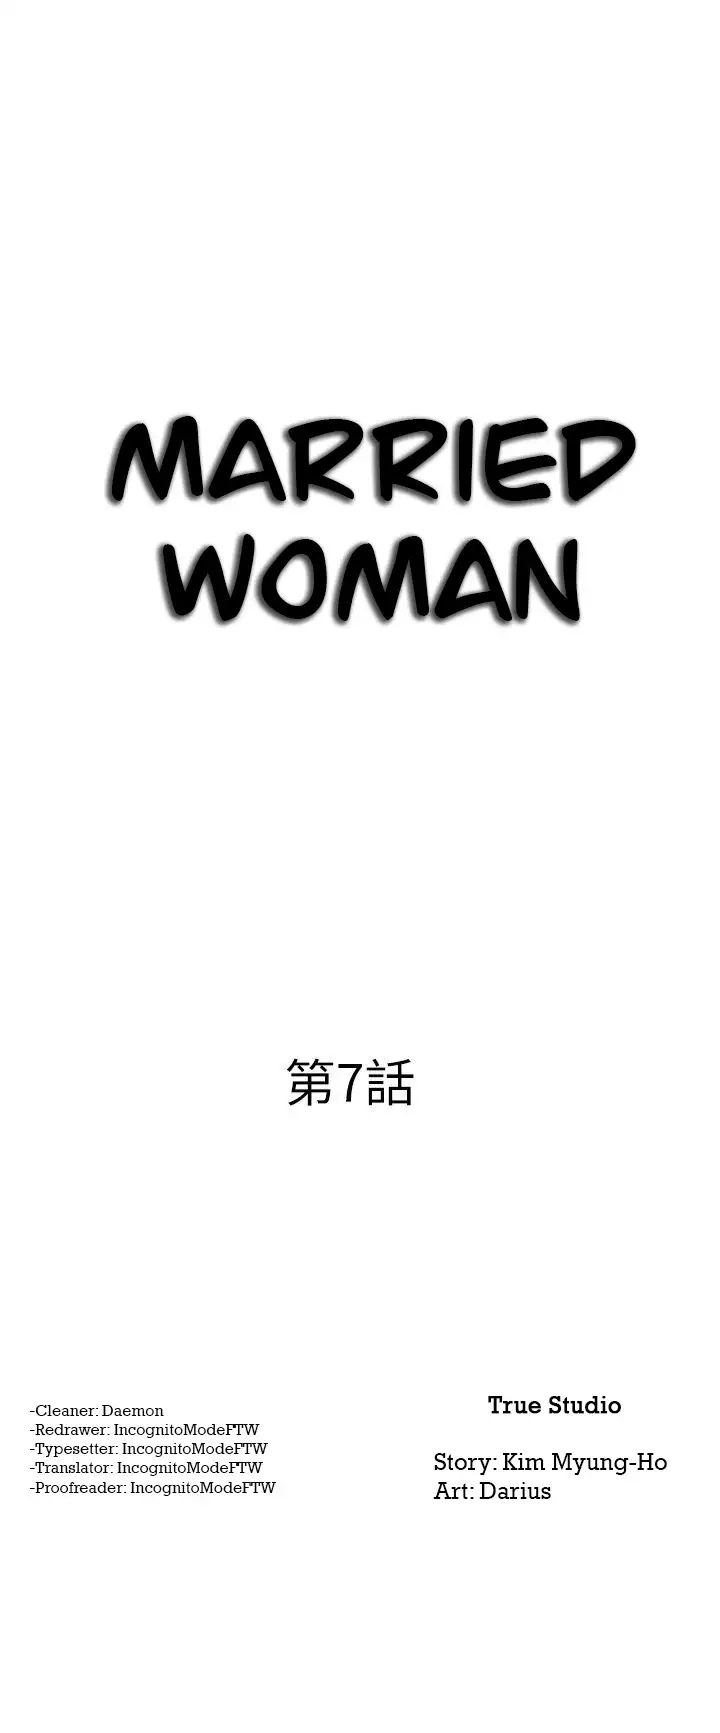 Married Woman image